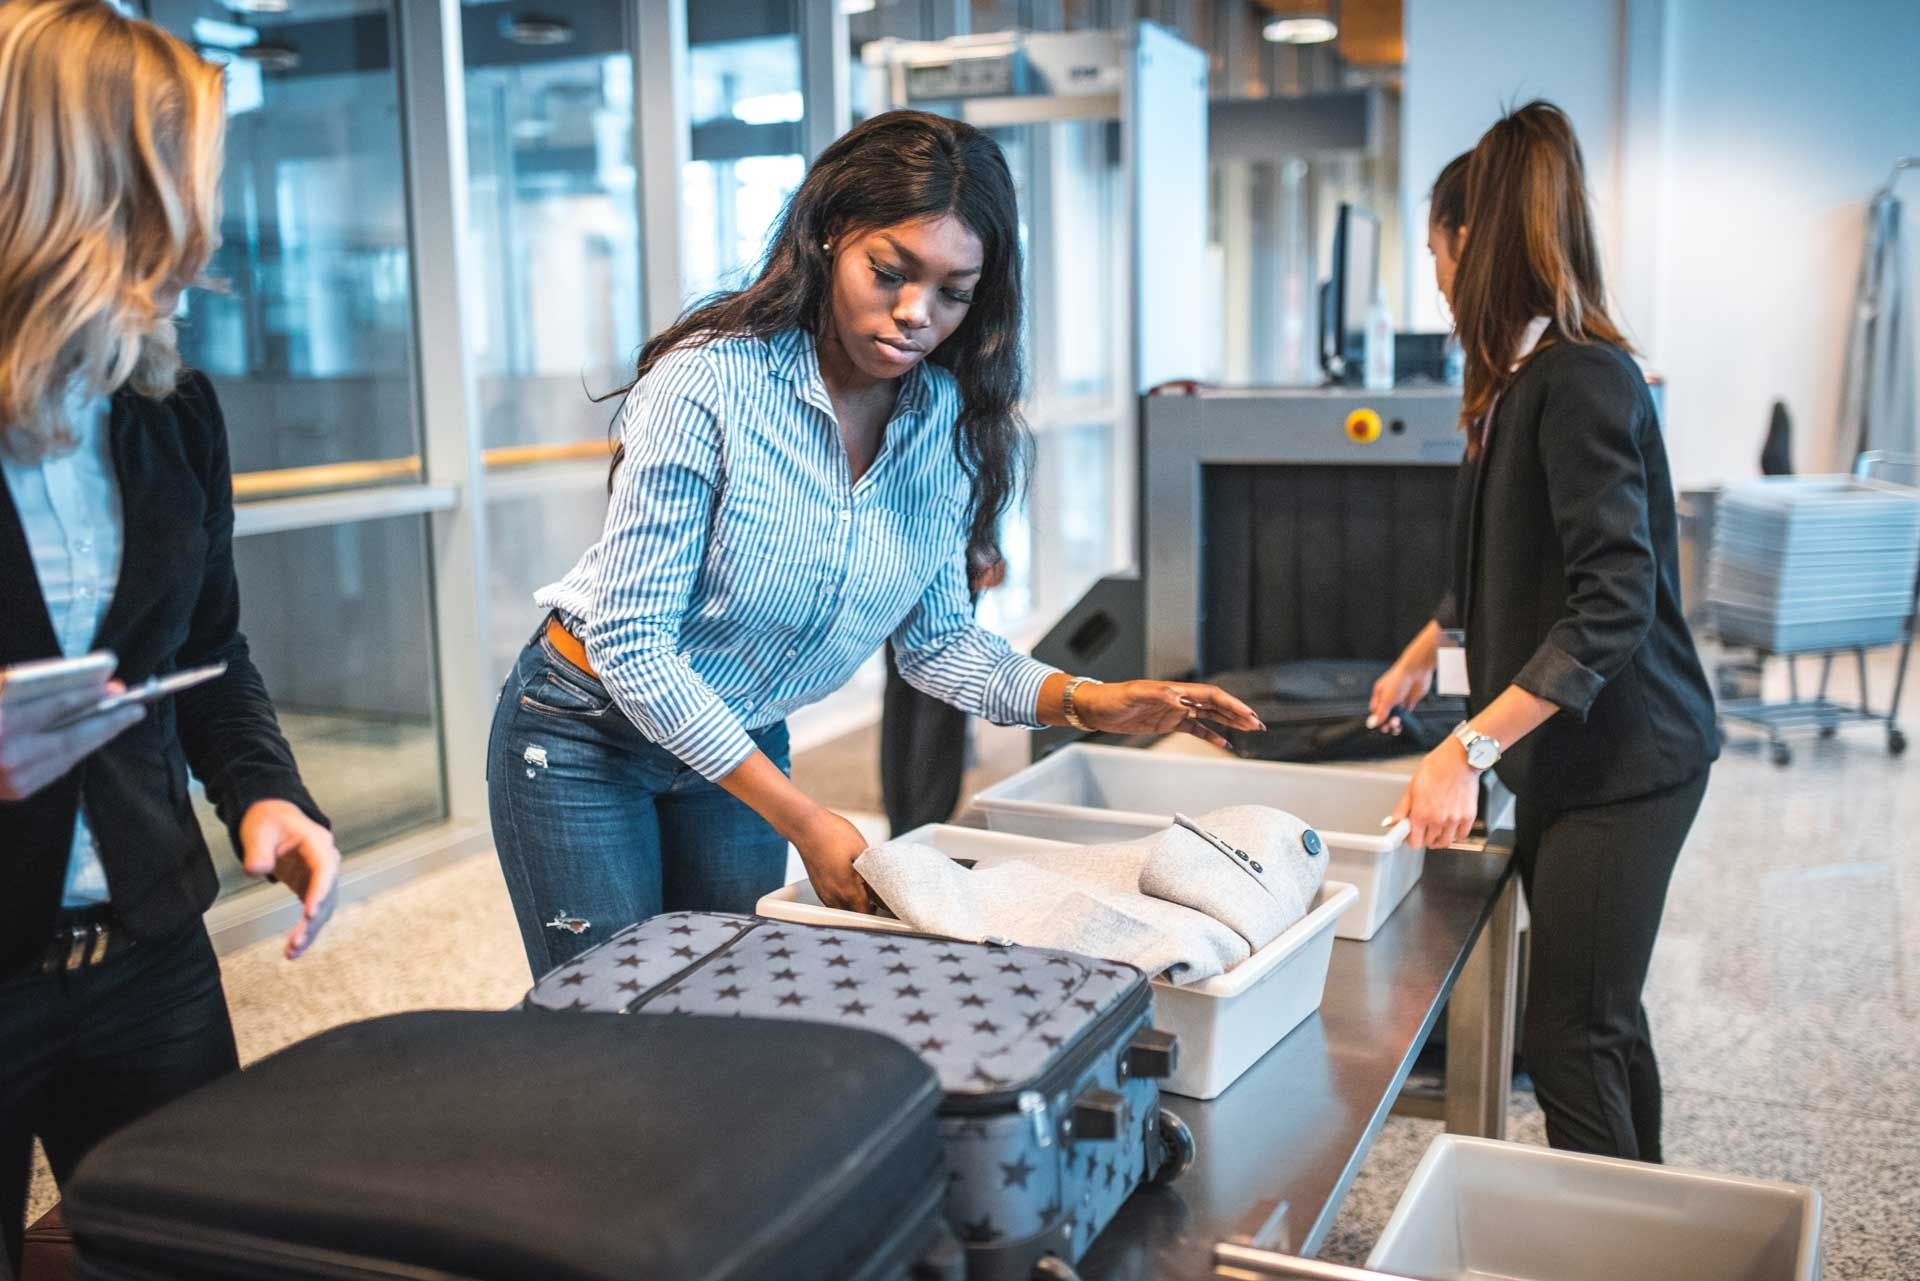 Young Female going through airport security with luggage 